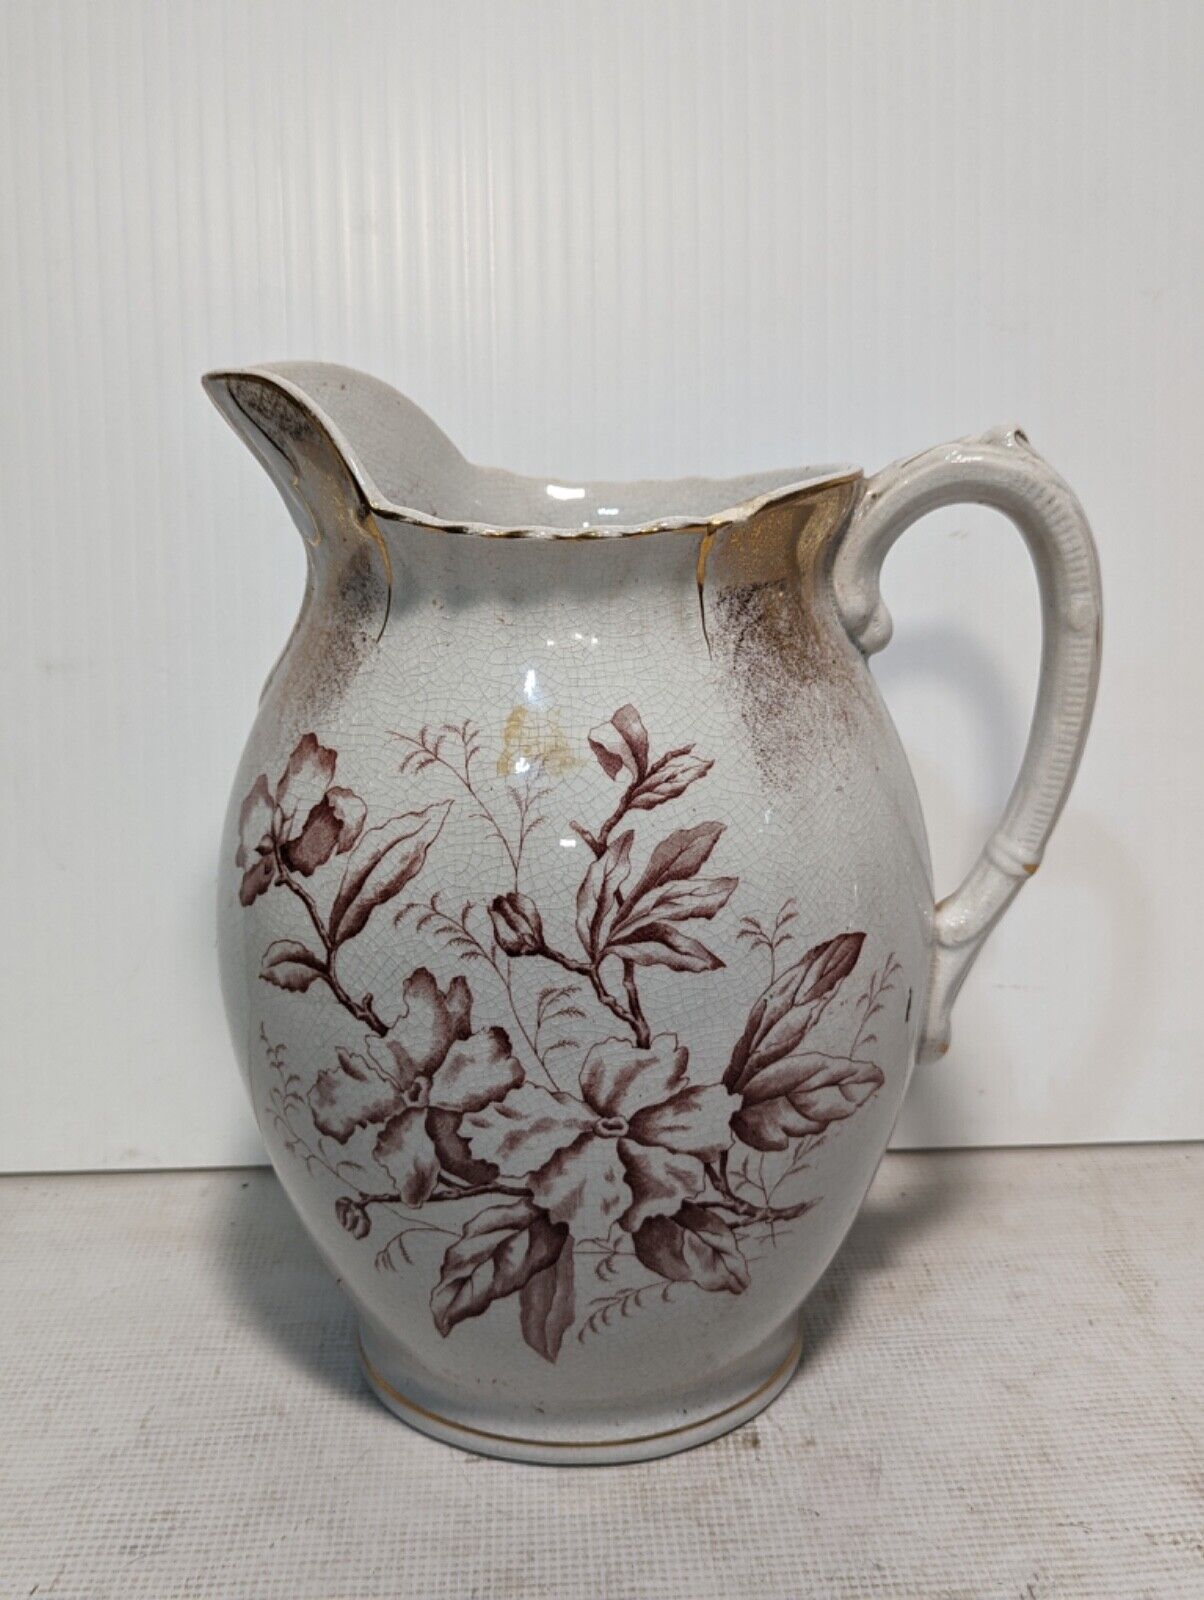 Fremont antique ceramic pitcher, White With Floral/Leaves Design